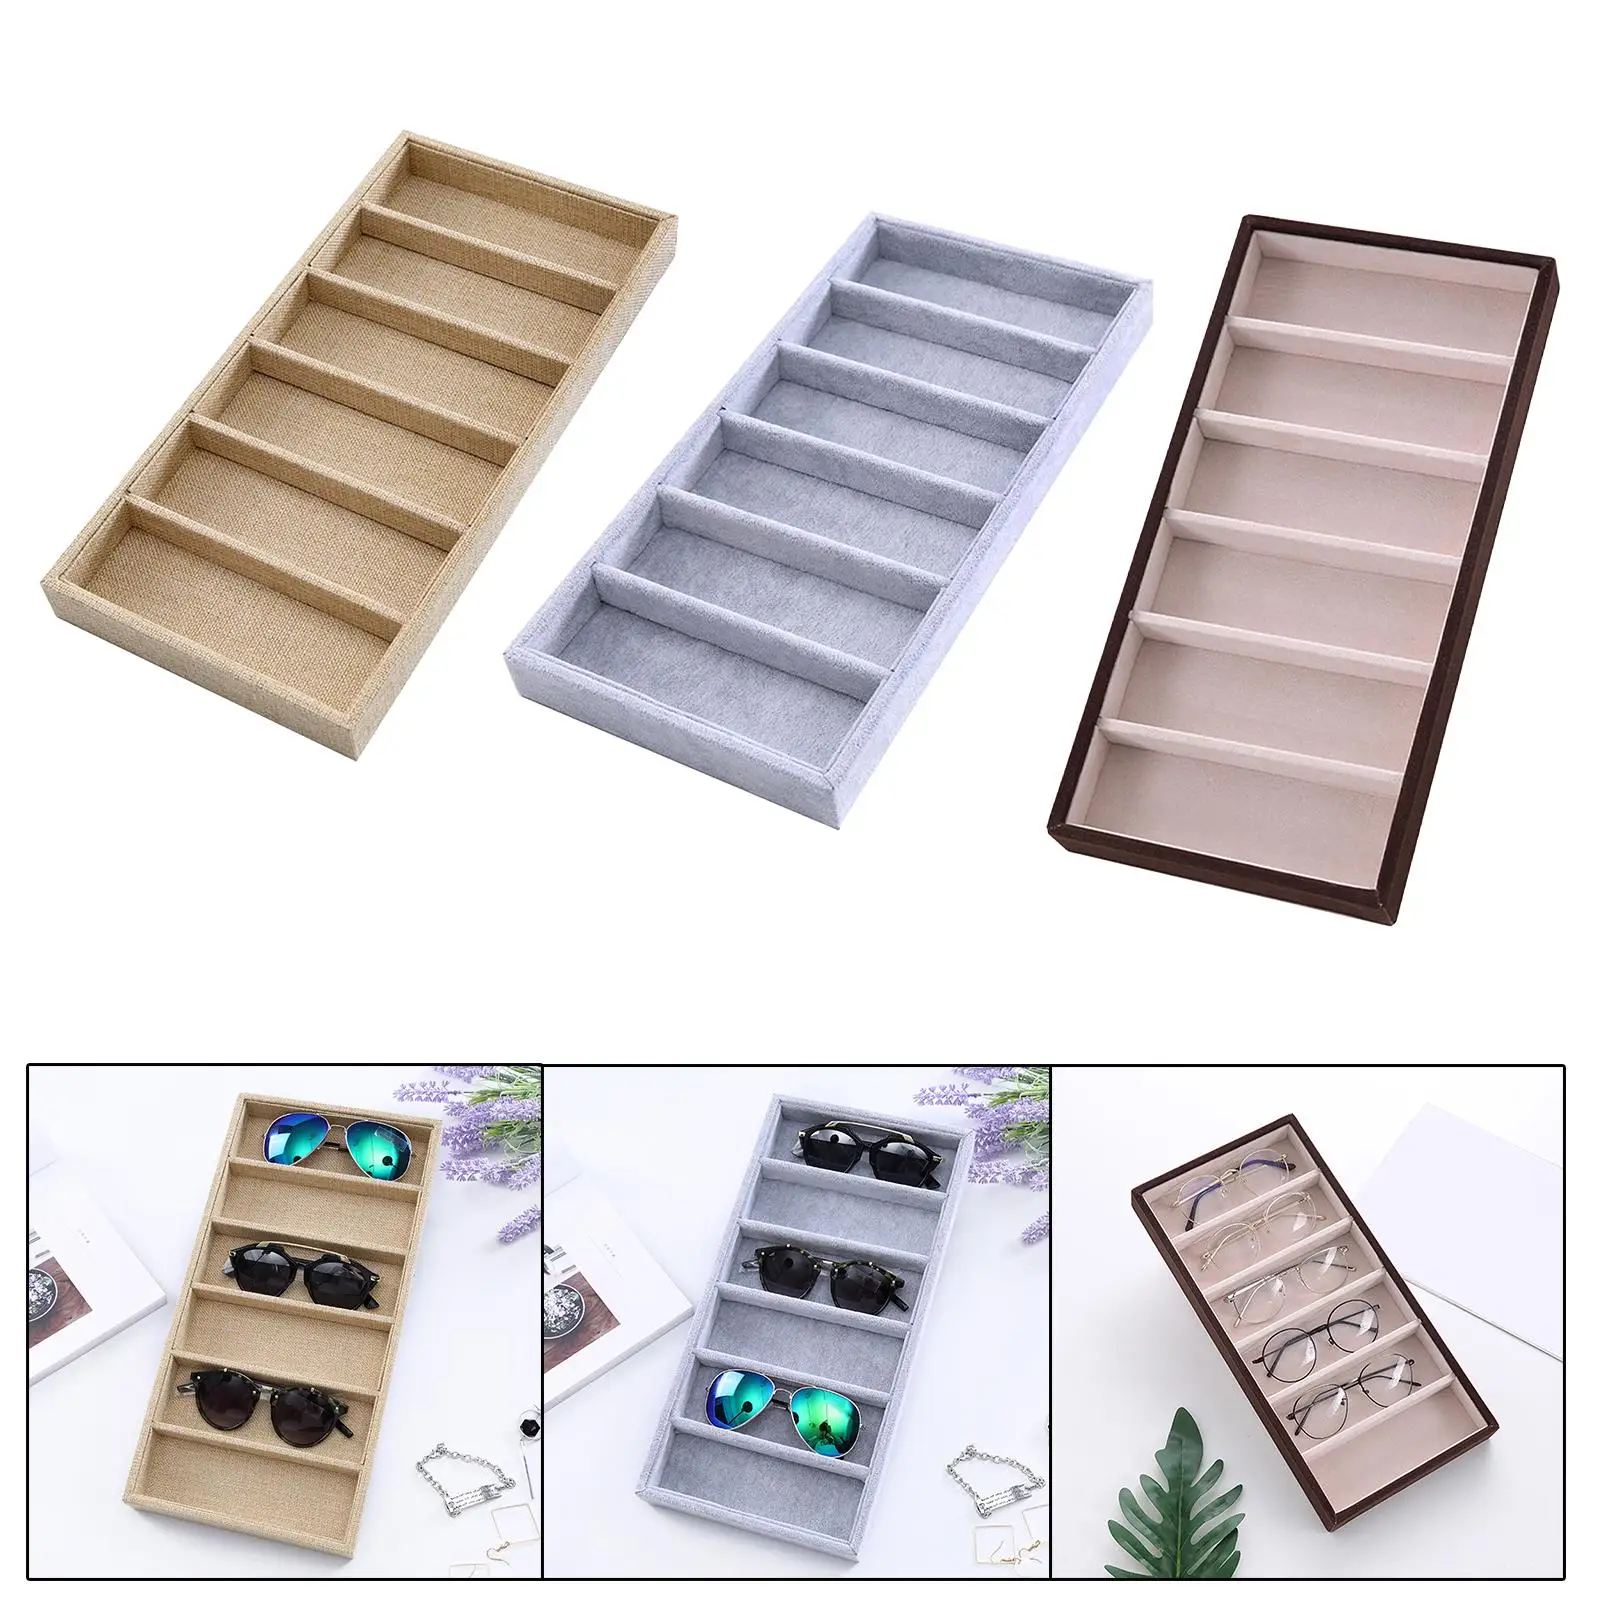 Glasses Organizer Tray 6 Compartment Jewelry Holder Container Storage Tray